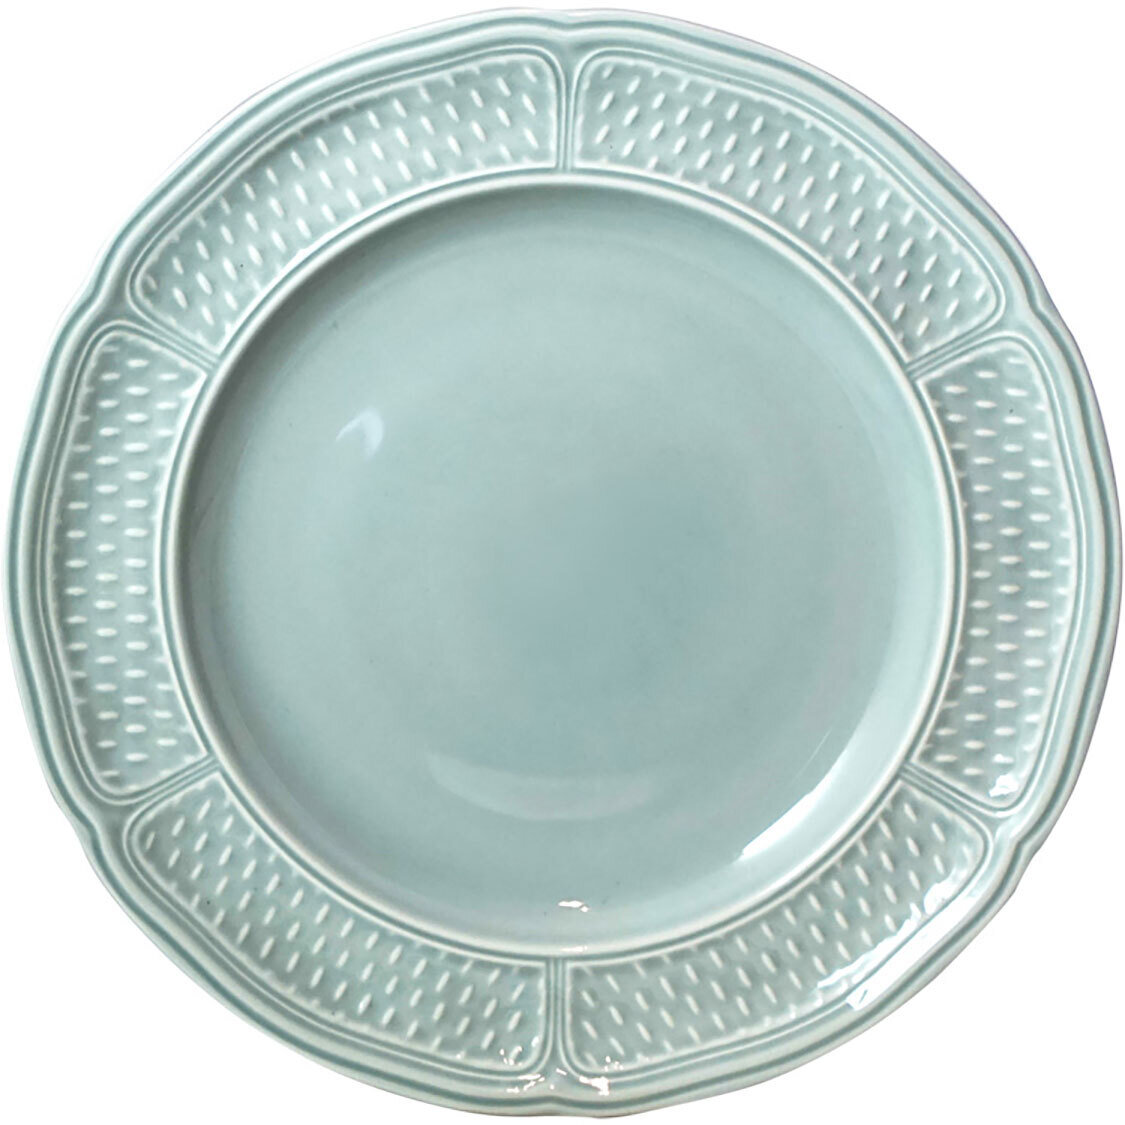 Gien Pont Aux Choux Earth Grey Dinner Plate 1162AEXT34